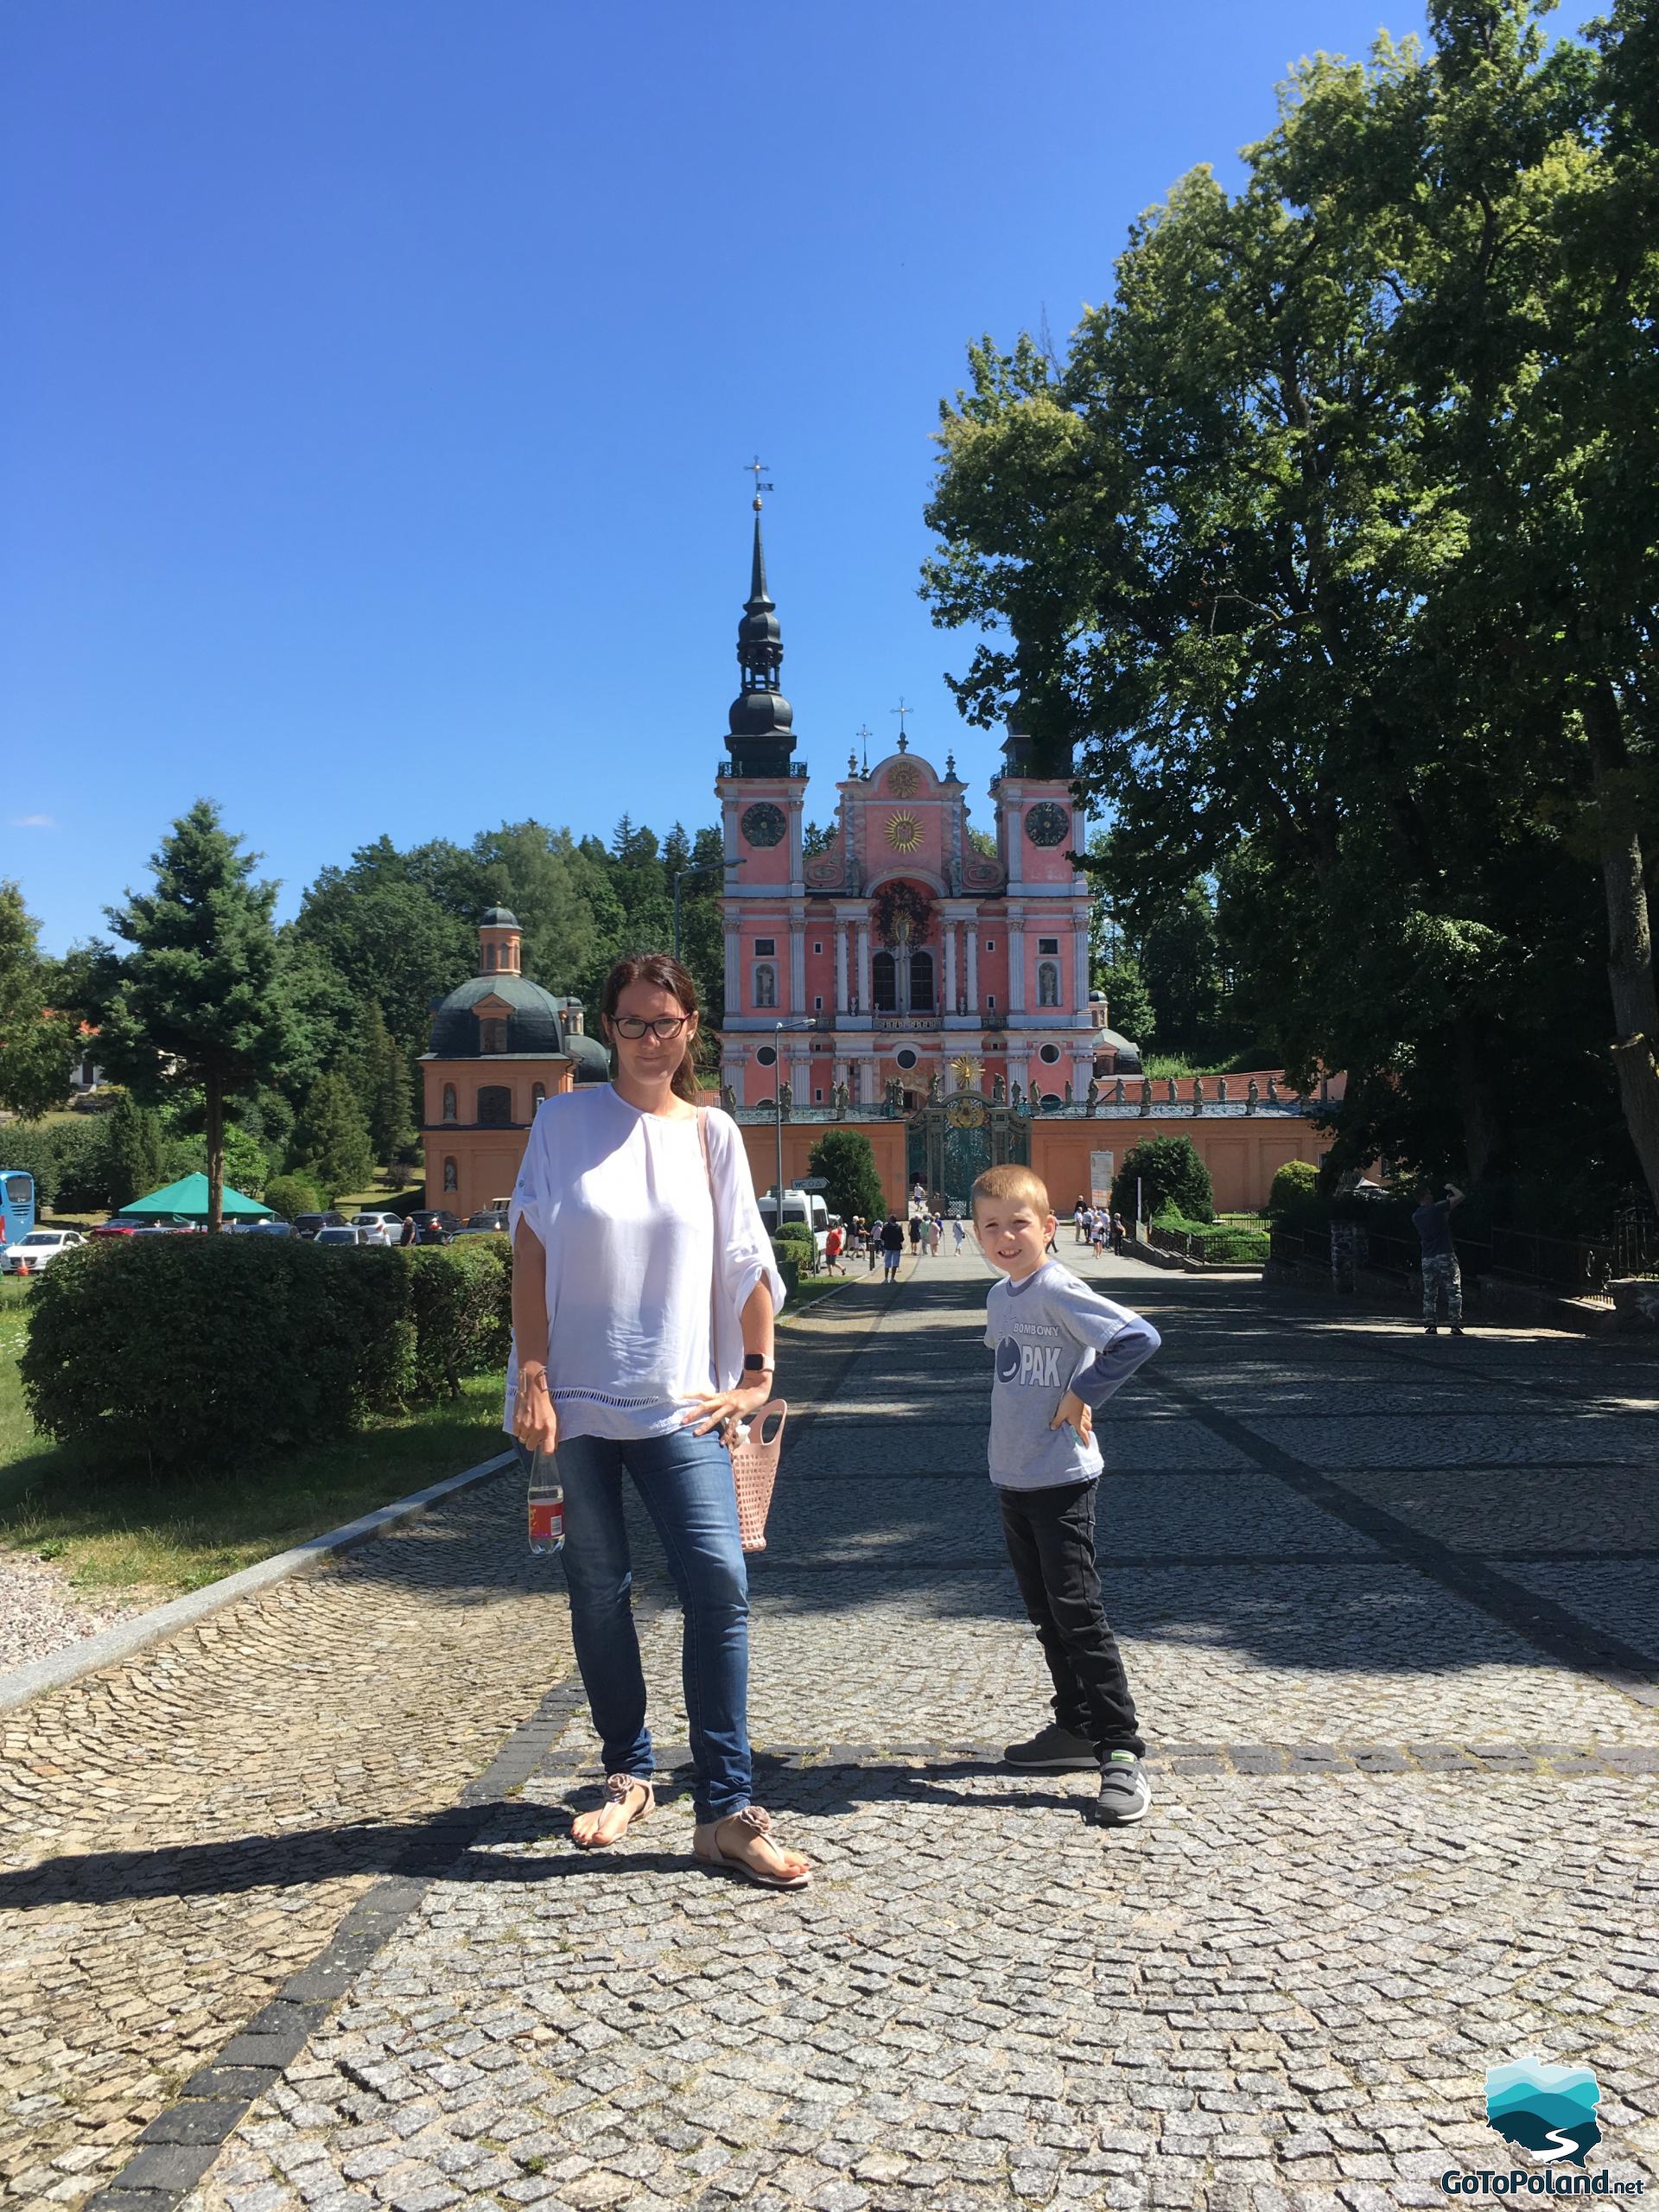 a woman and a child standing in front of a sanctuary, the building of the sanctuary is pink with two spires